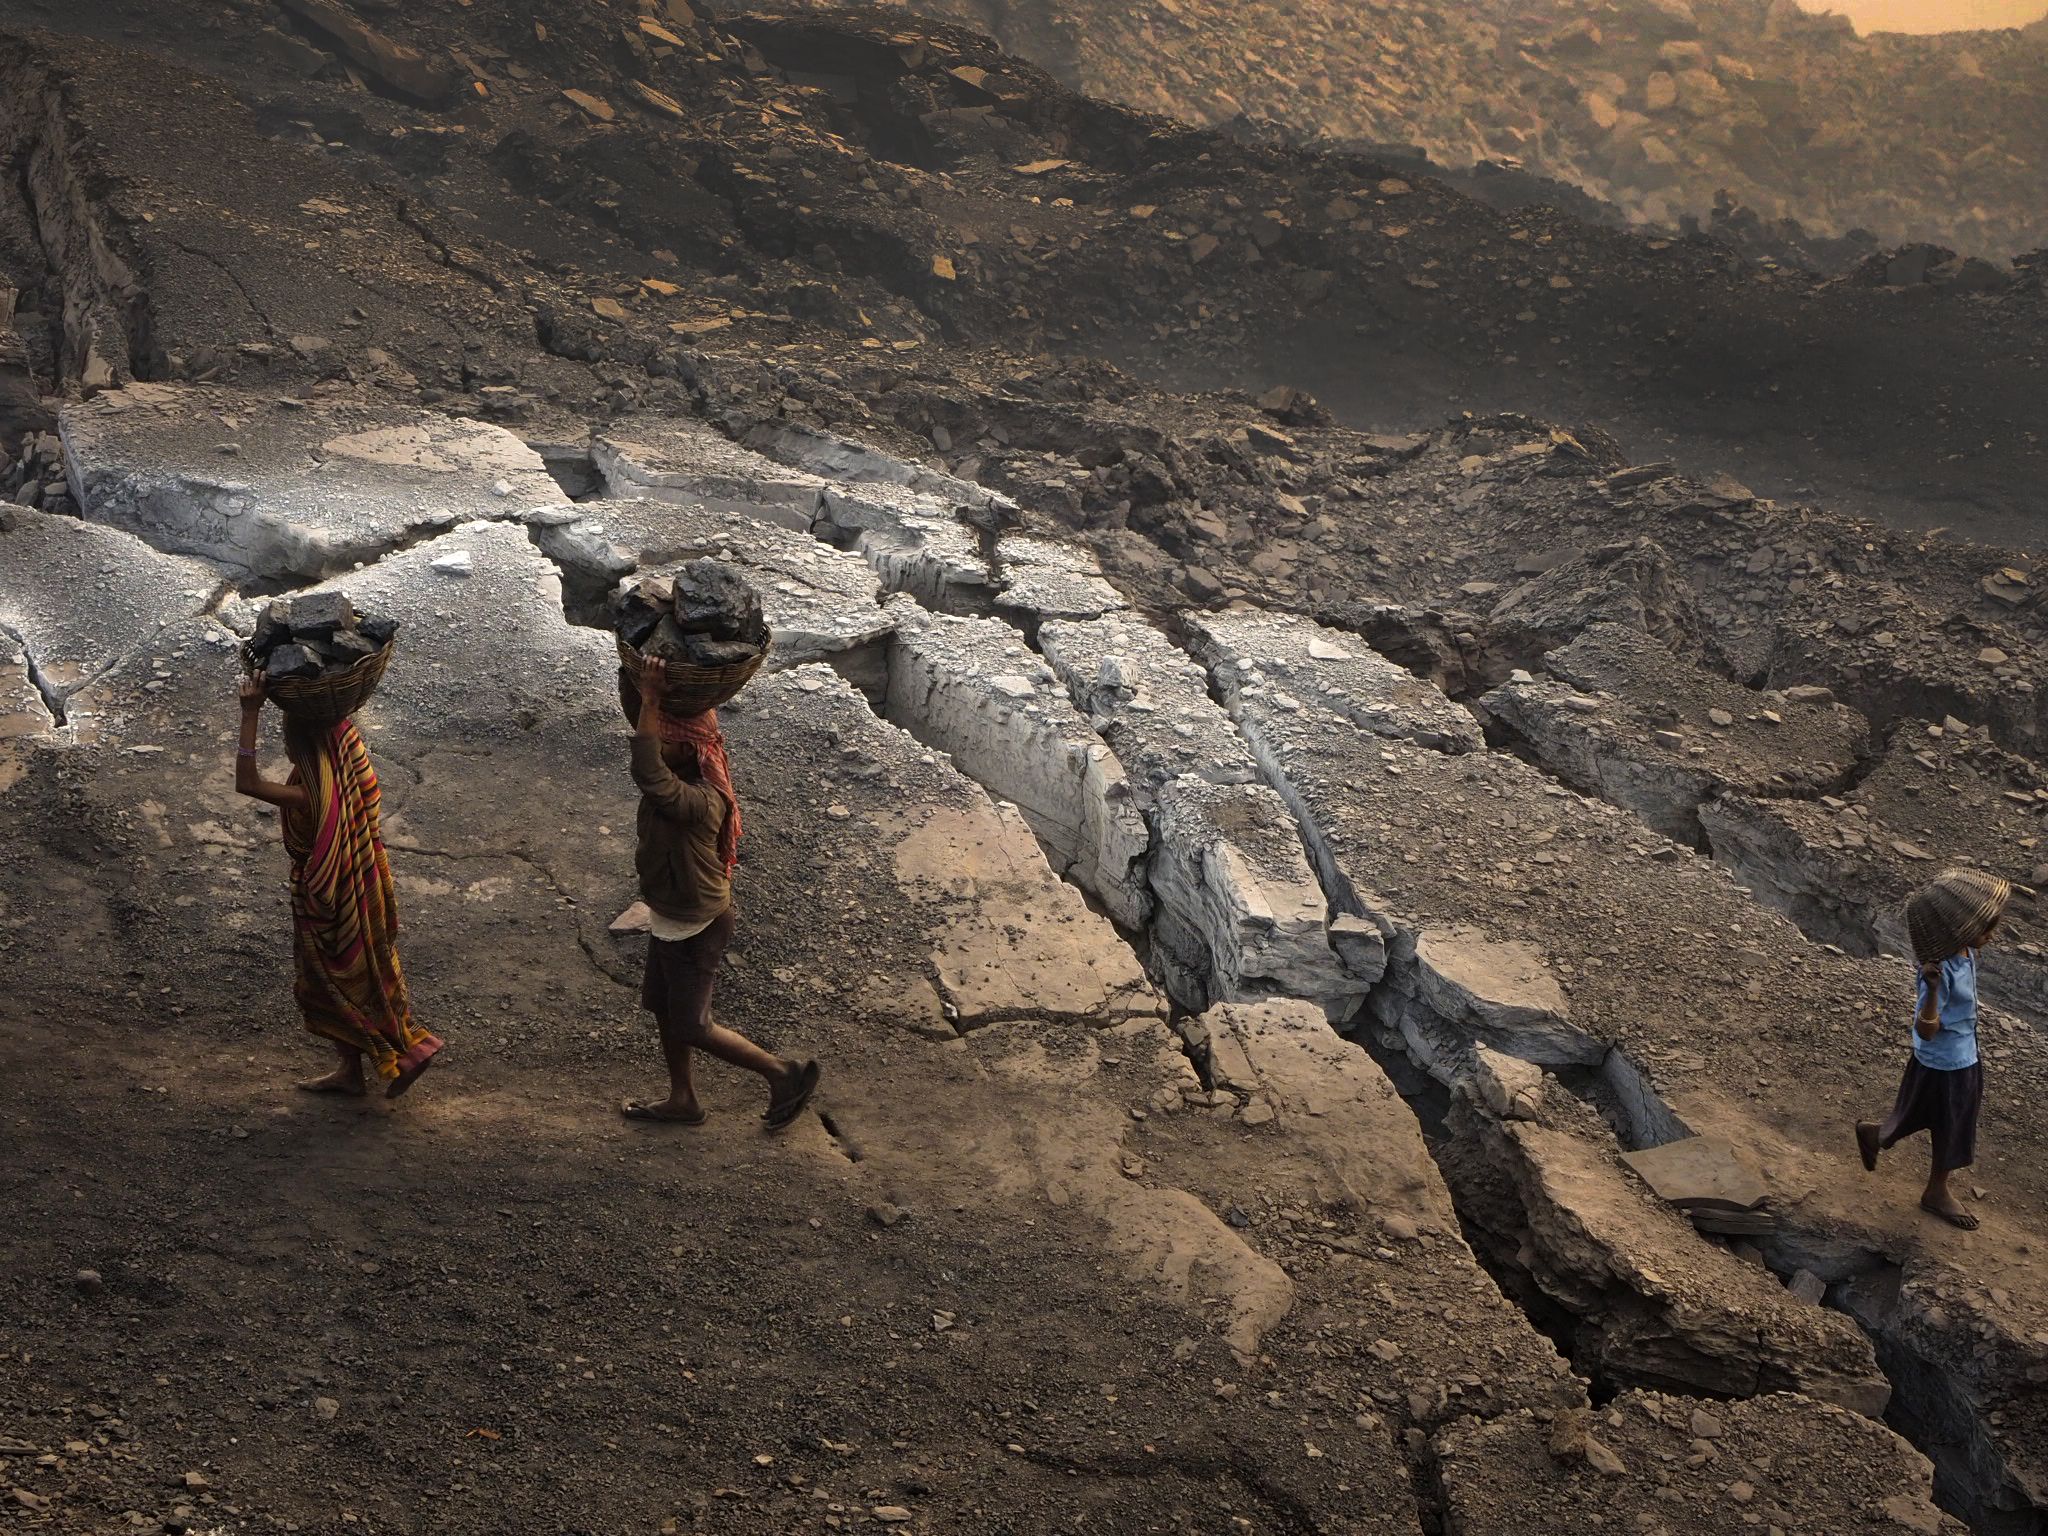 Coal scavengers race past cracks in the earth that emit flames and toxic fumes near Ganshadih.